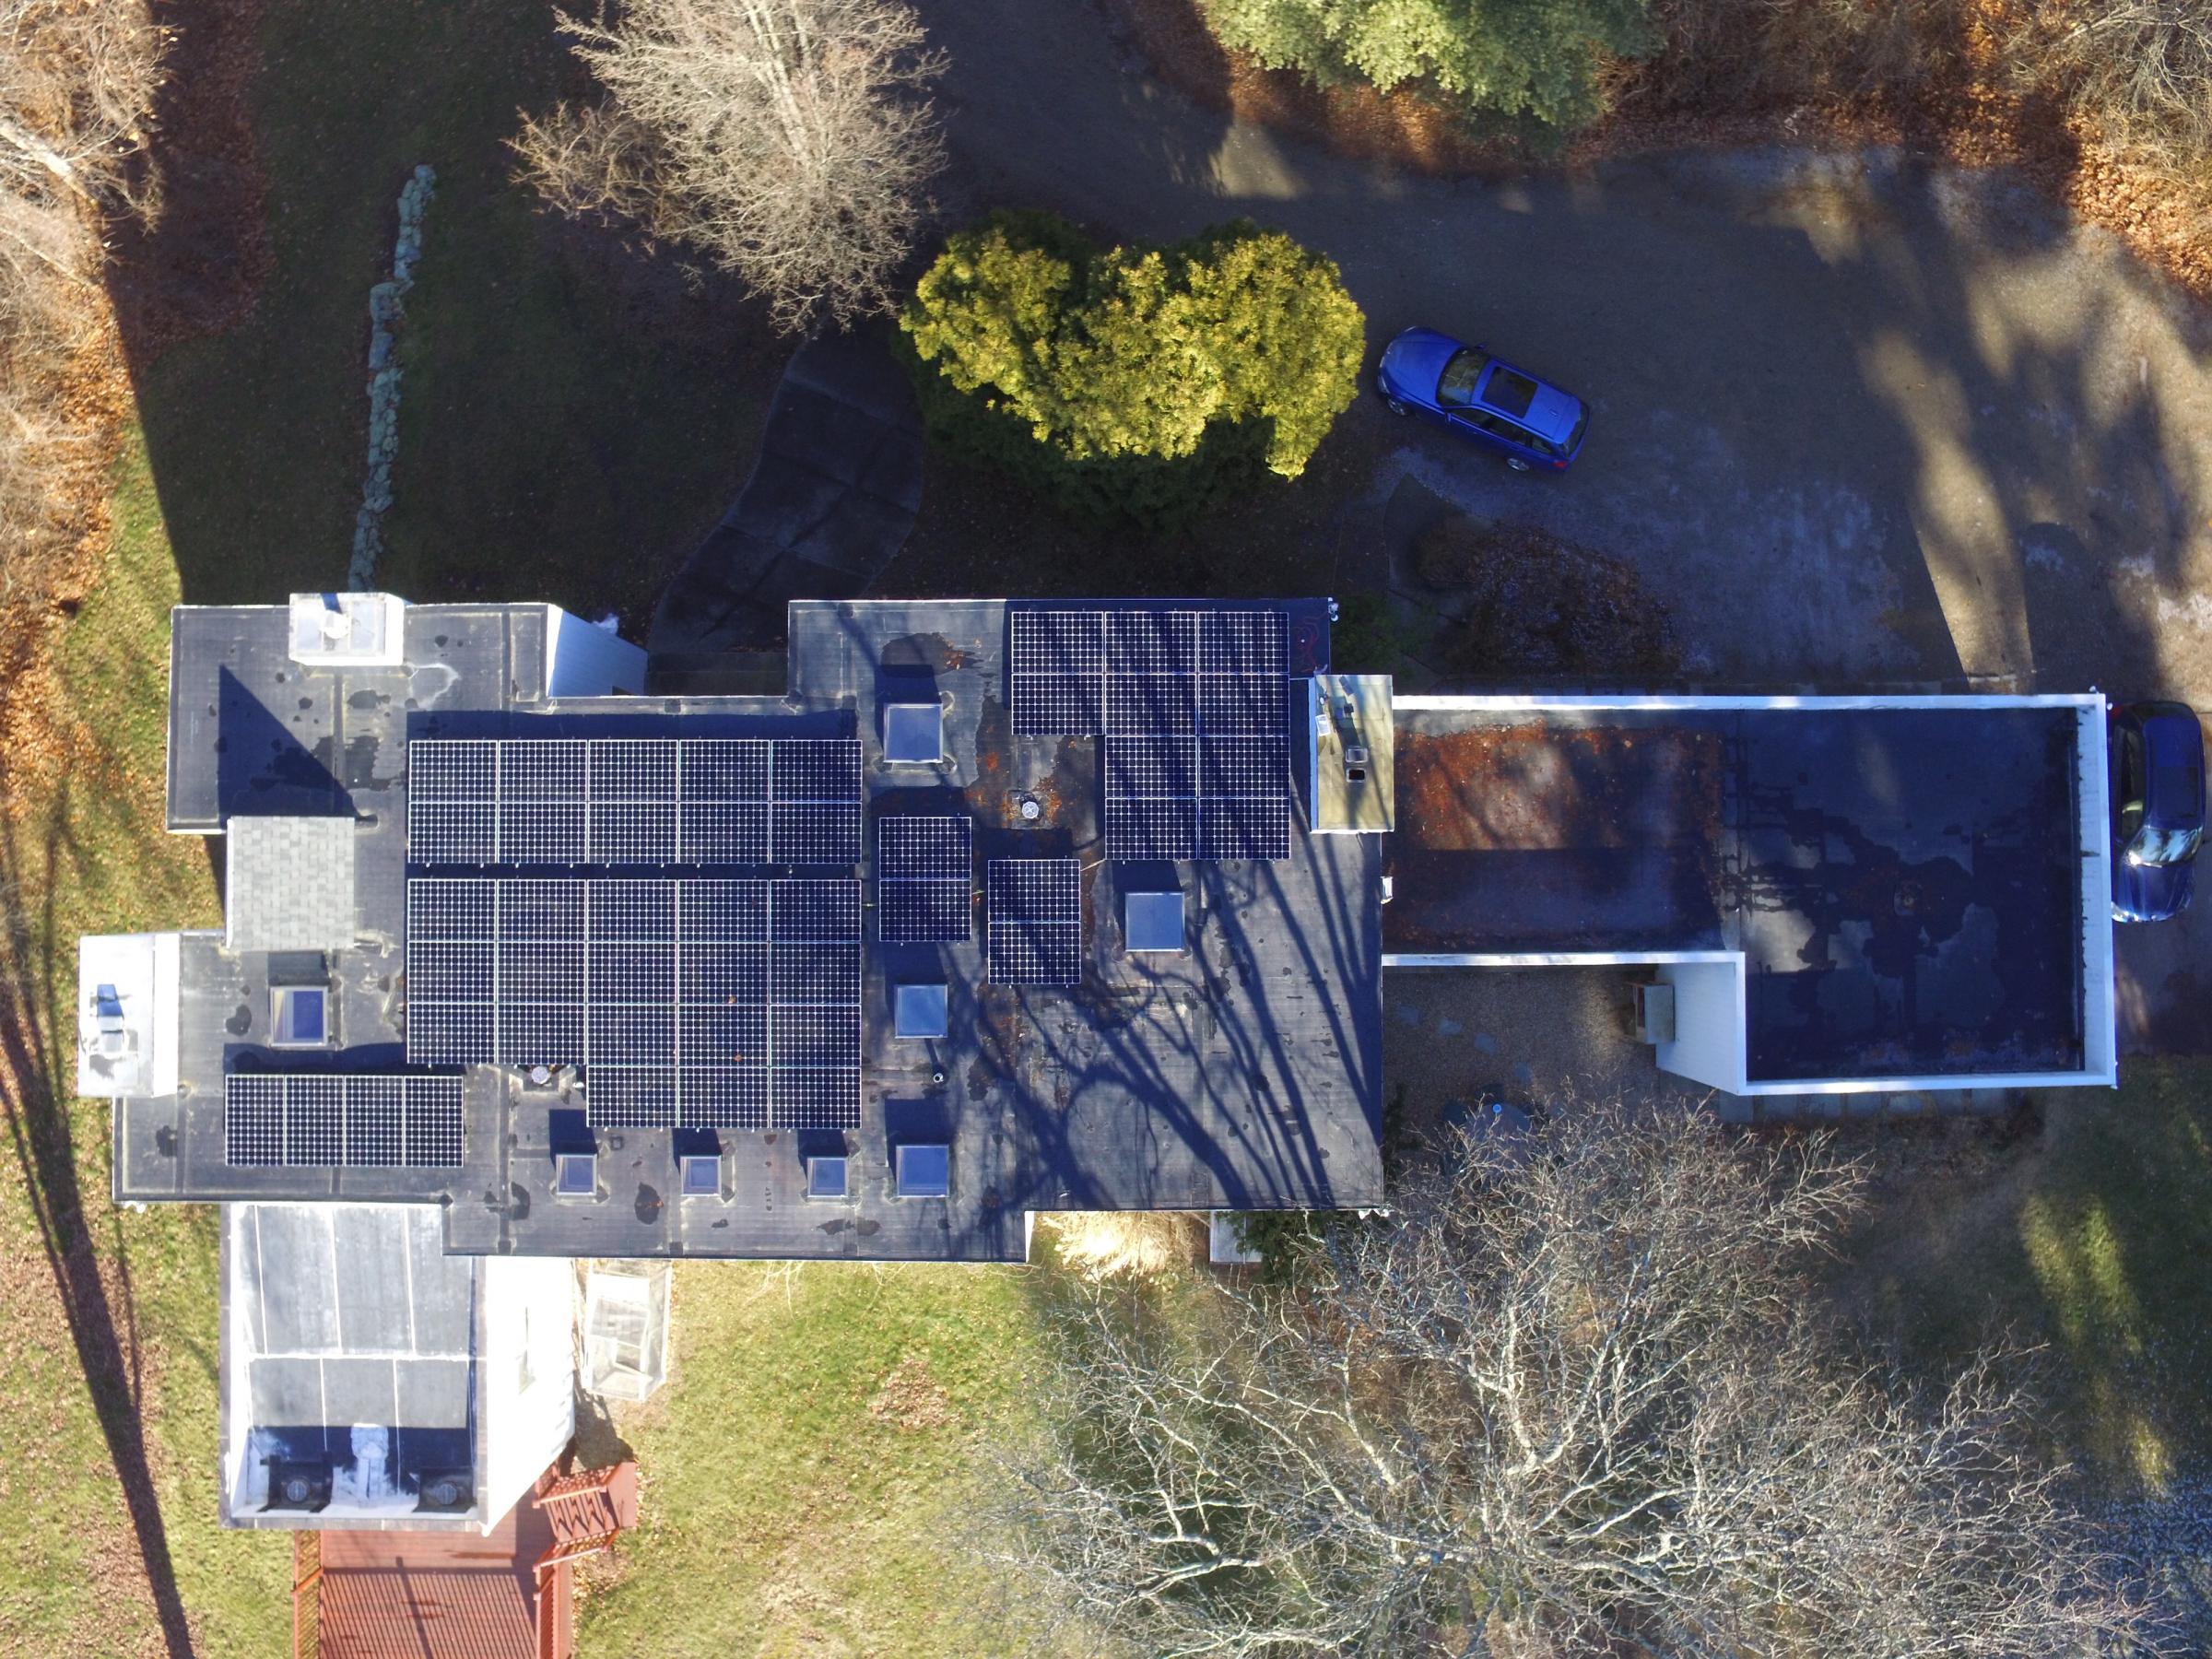 Our solar panel array on the roof of our house, our "Green Zero Carbon Home"